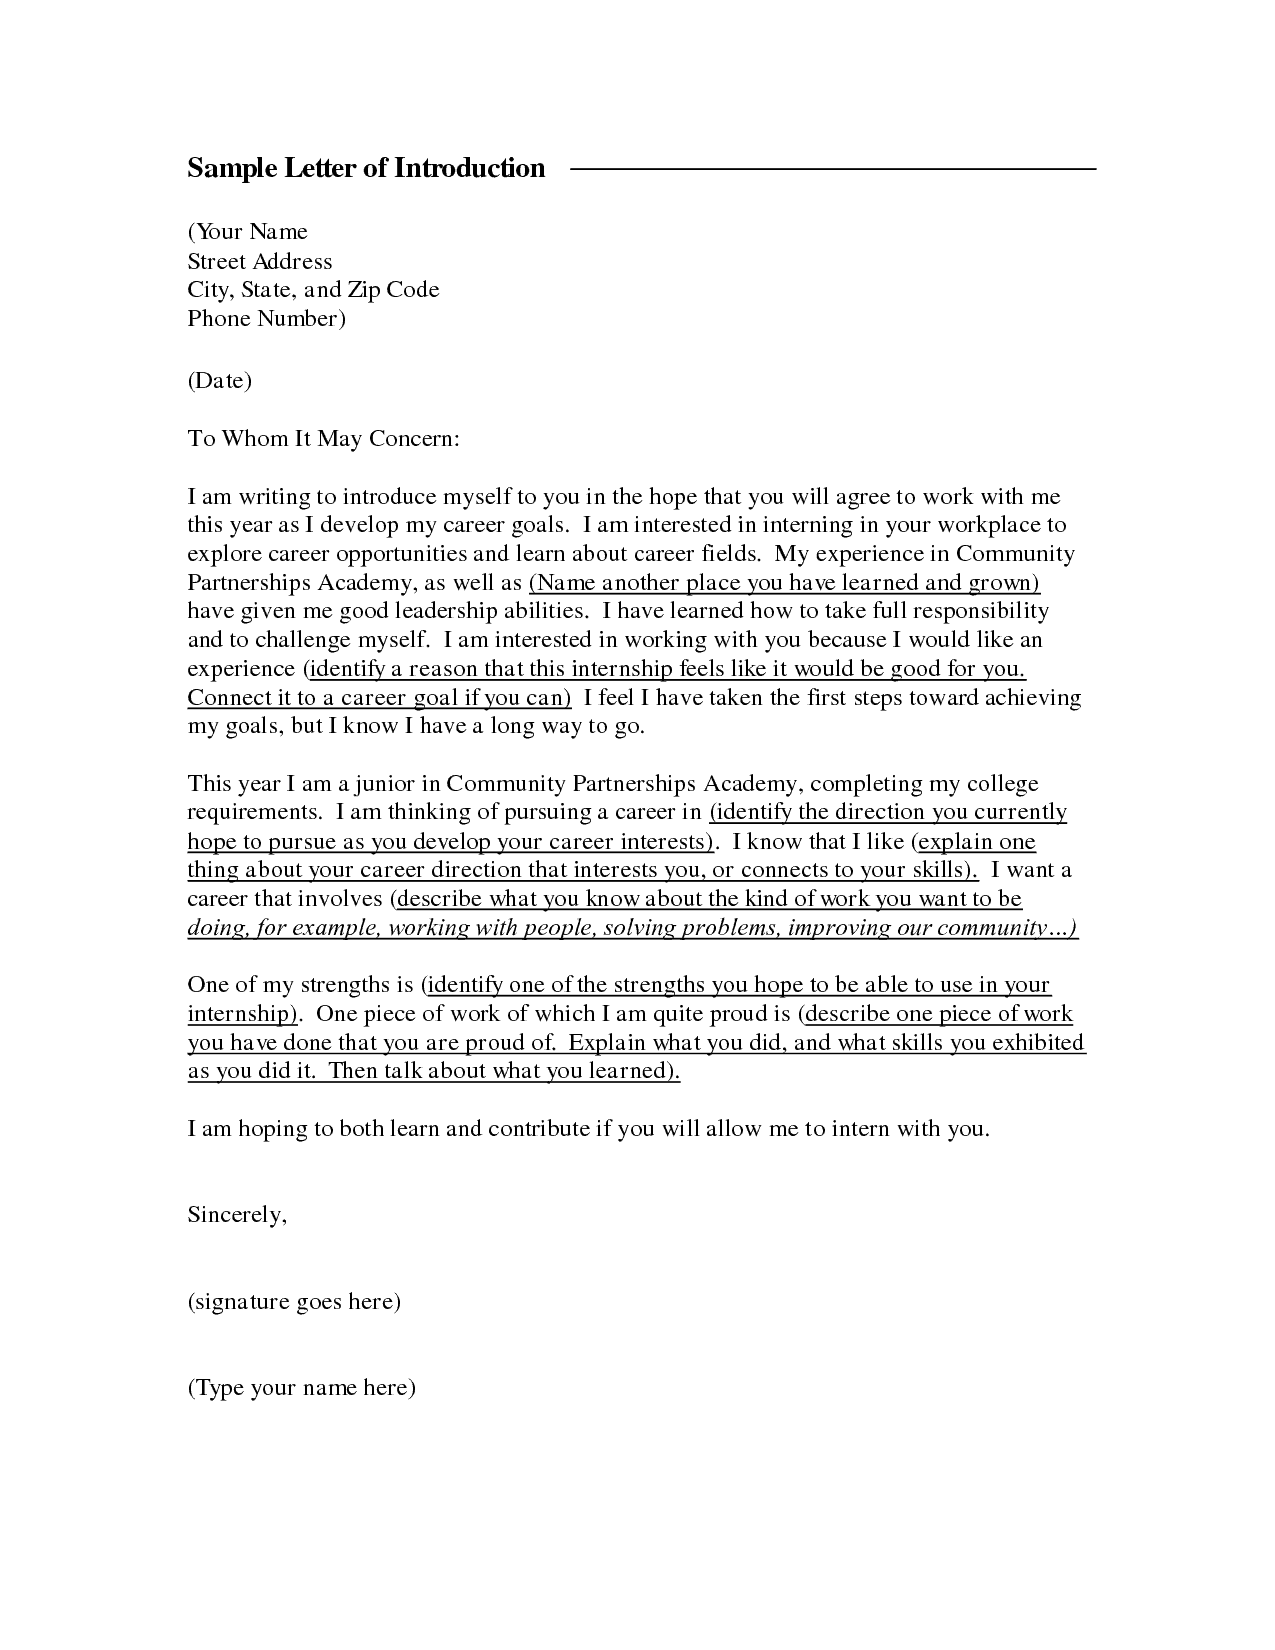 Example Of Letter Of Introduction For Job Application from www.sampleletterword.com